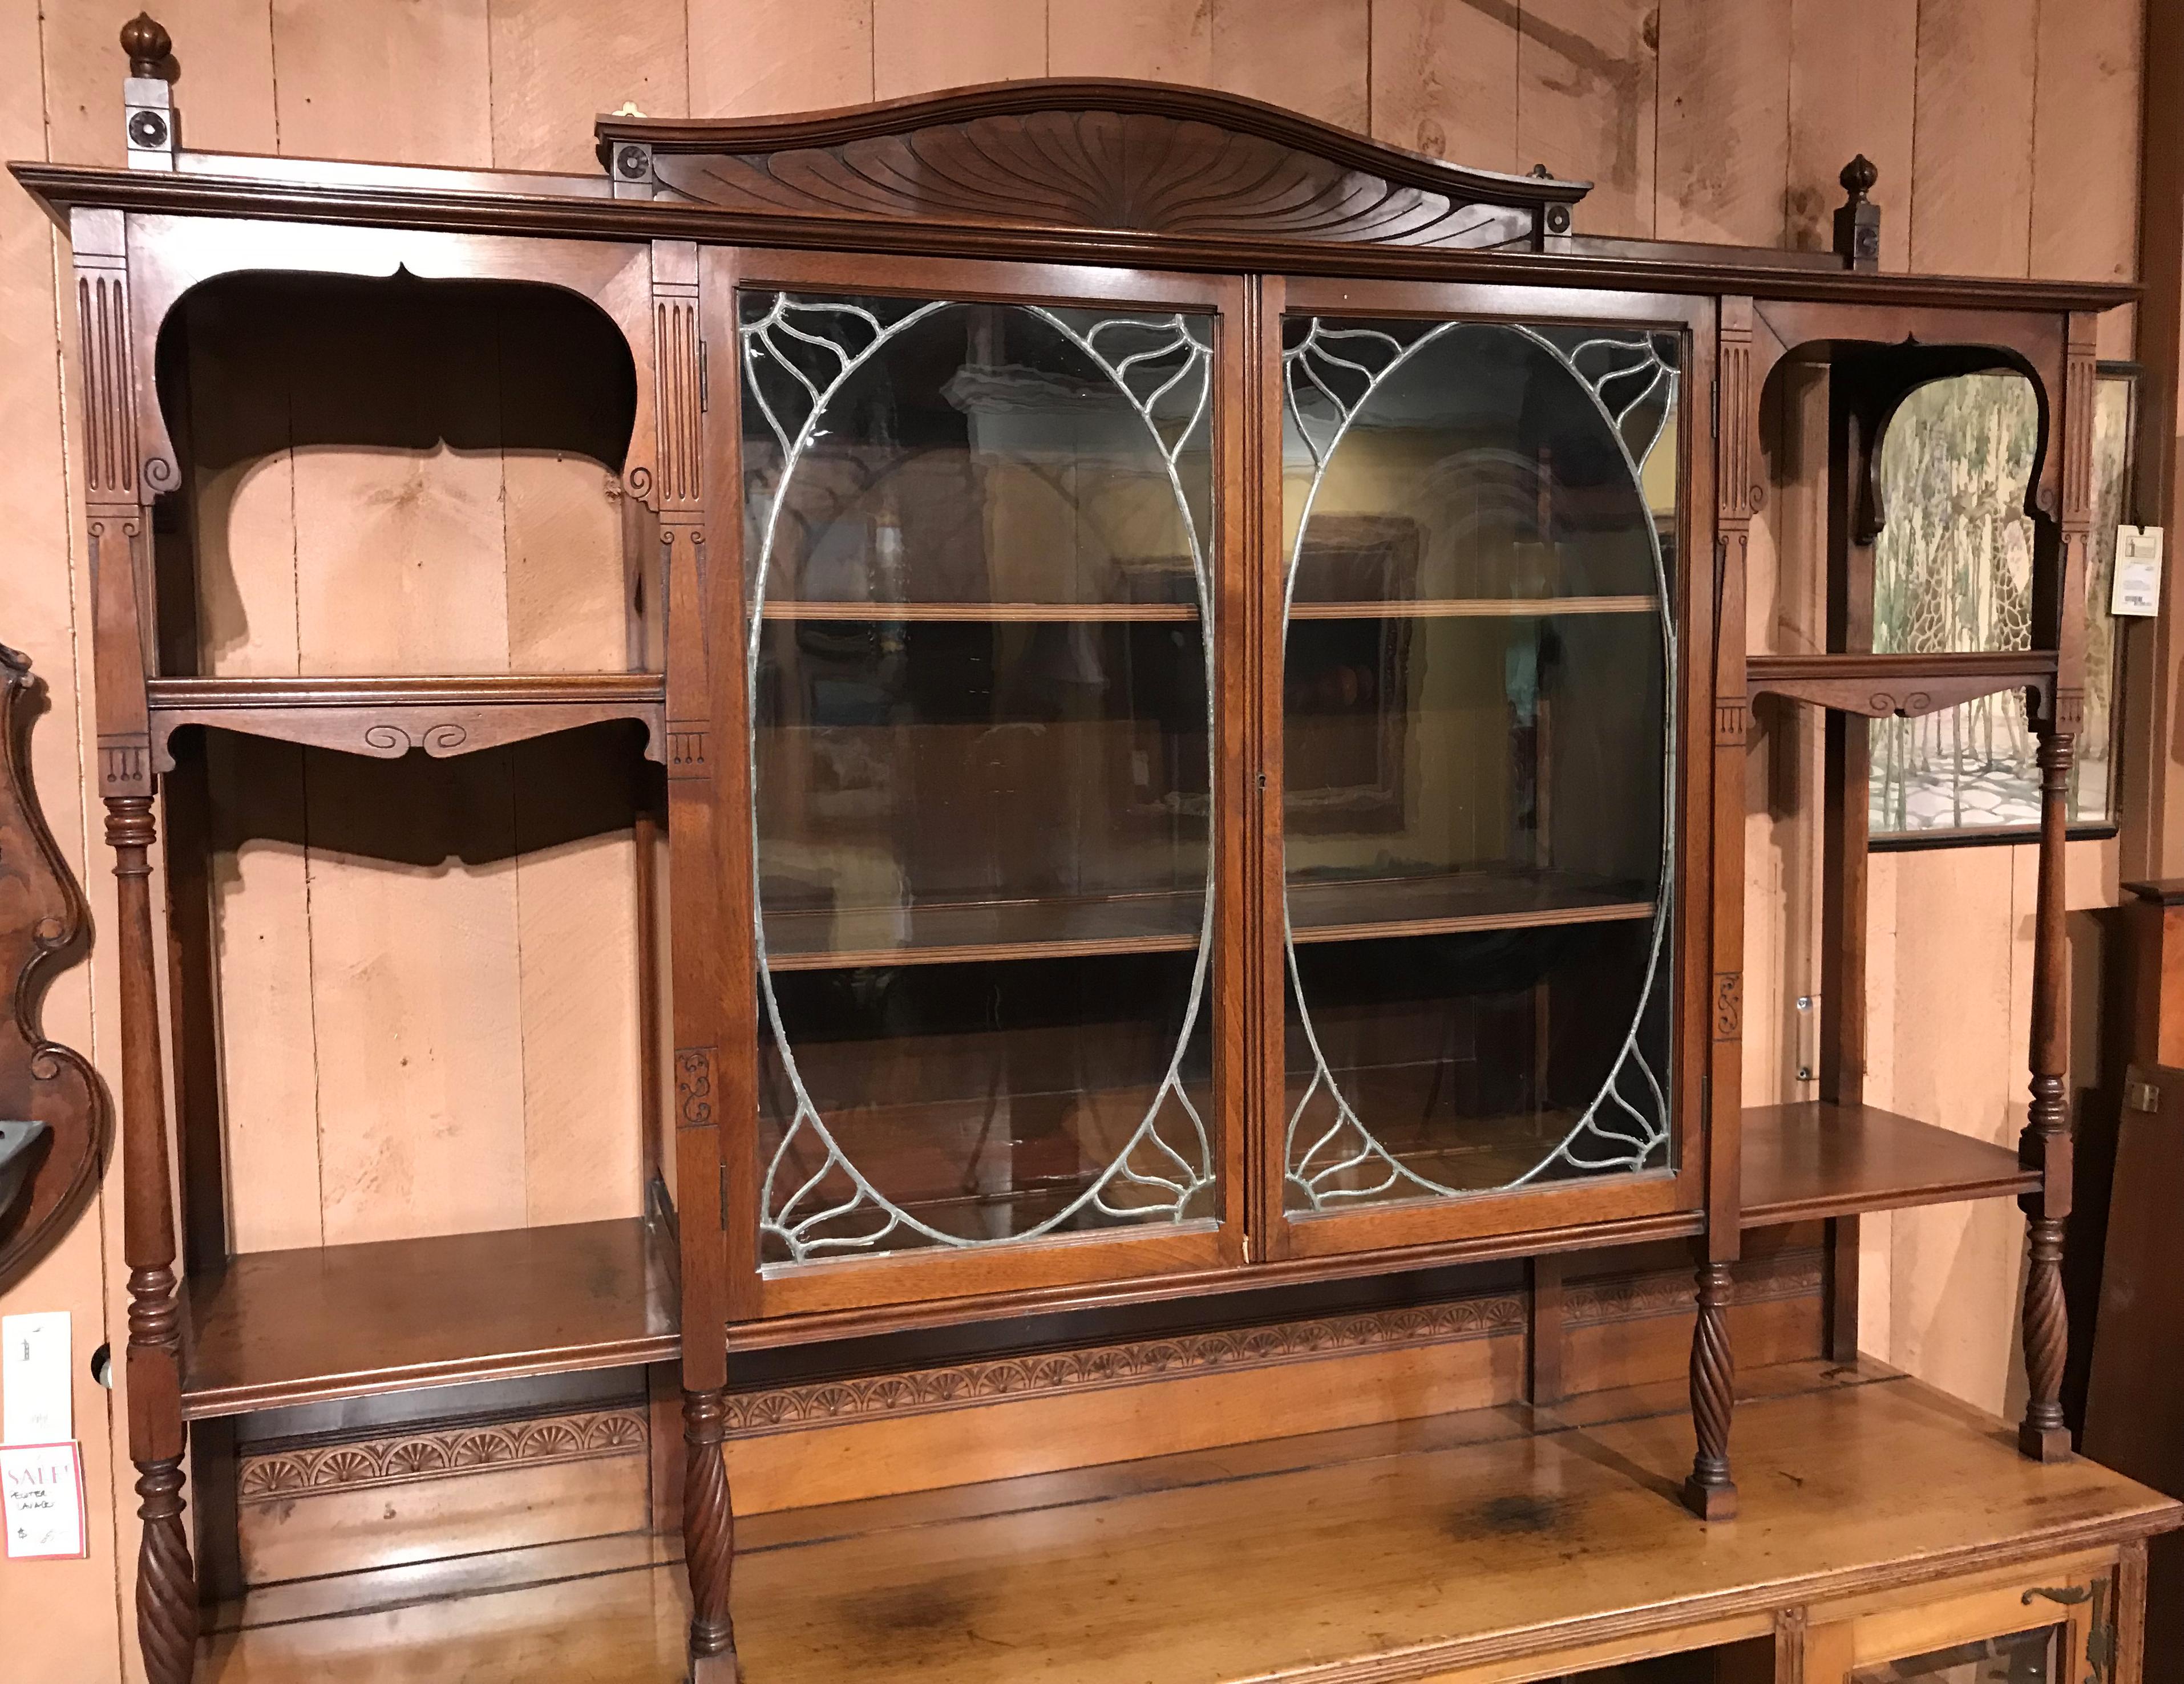 A fine two part English Art Nouveau étagère or bookcase, its upper case featuring a radial carved crest and spiral turned finials surmounting a center cabinet with leaded glass doors flanked by open shelves accented with carved rosettes and turned